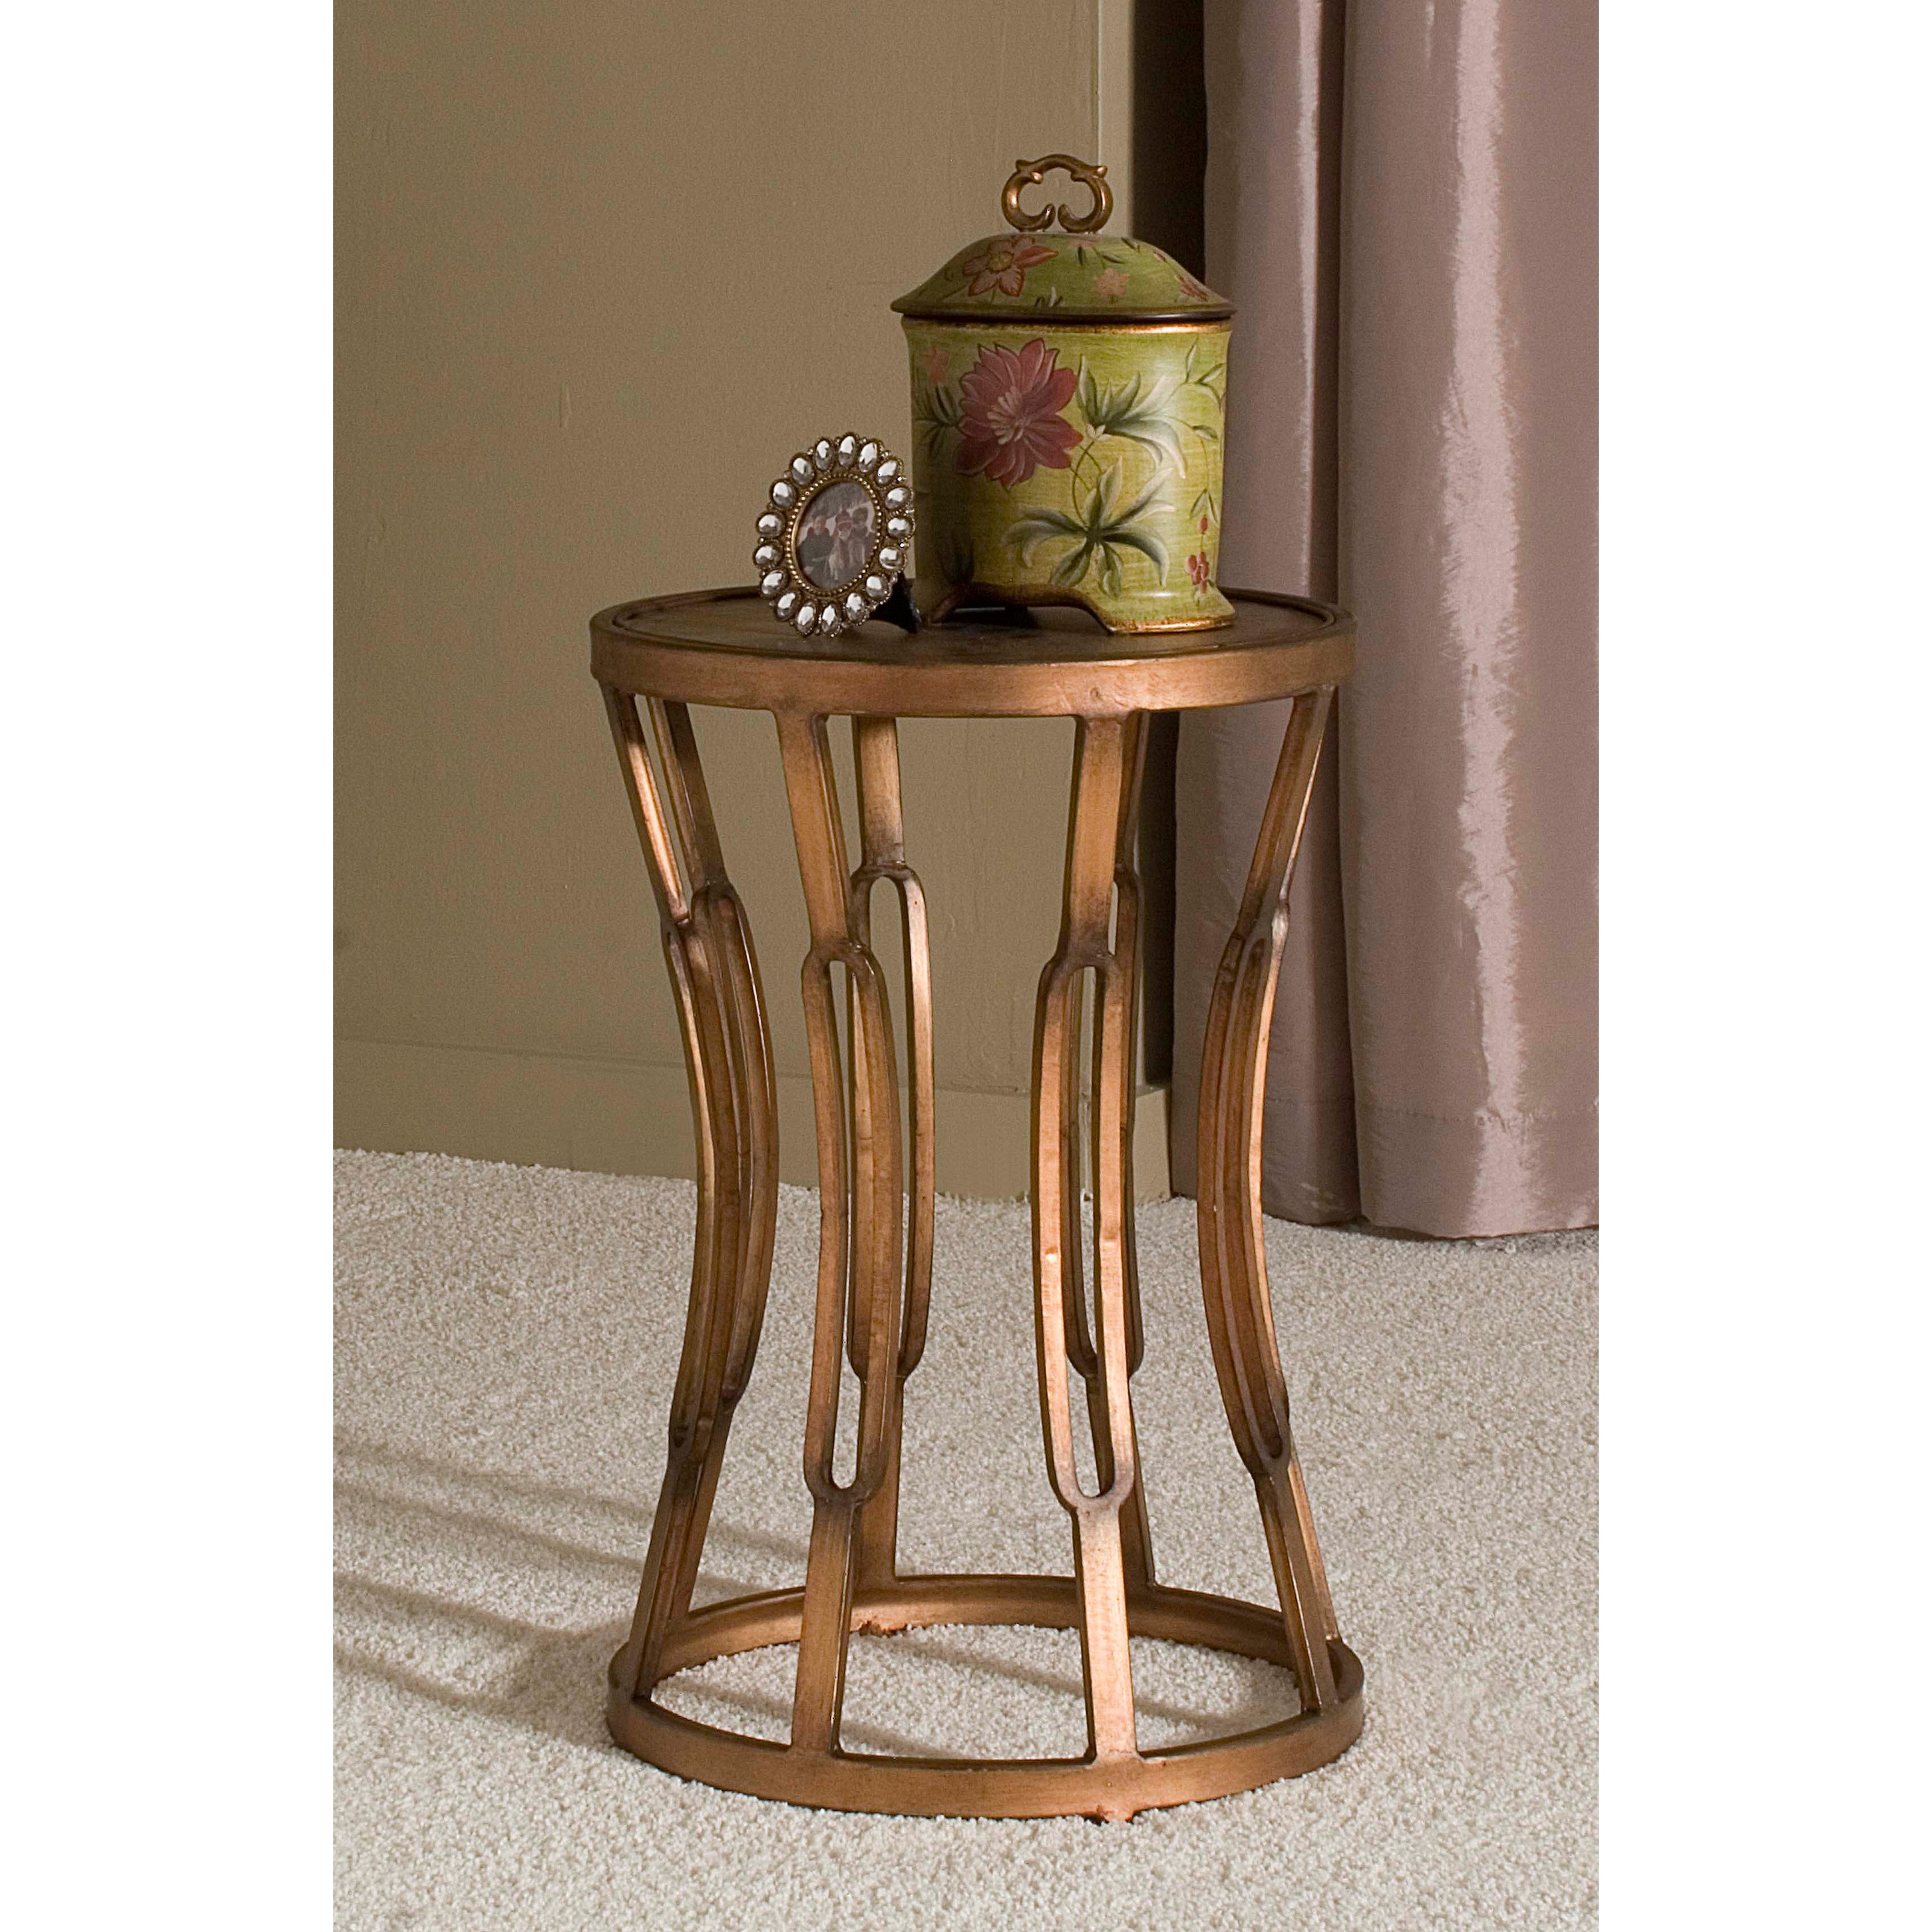 innerspace hourglass accent table antique copper end french drum shaped trunk bathroom runner nate berkus bath rug bookcase nesting bedside tables outside patio cabinet door knobs